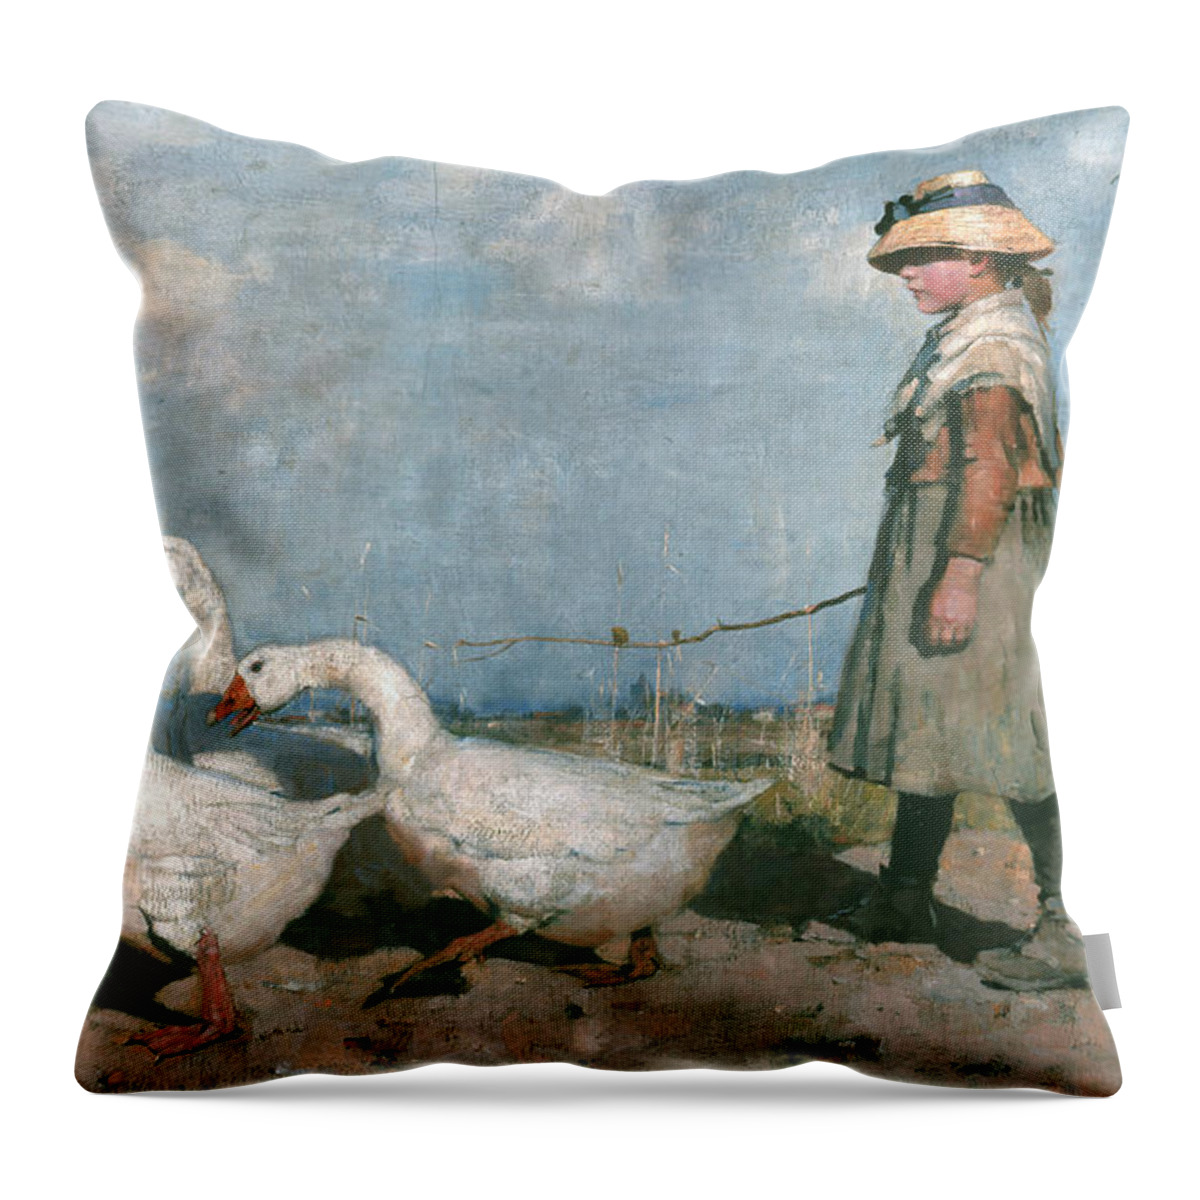 Scottish Painters Throw Pillow featuring the painting To Pastures New by James Guthrie